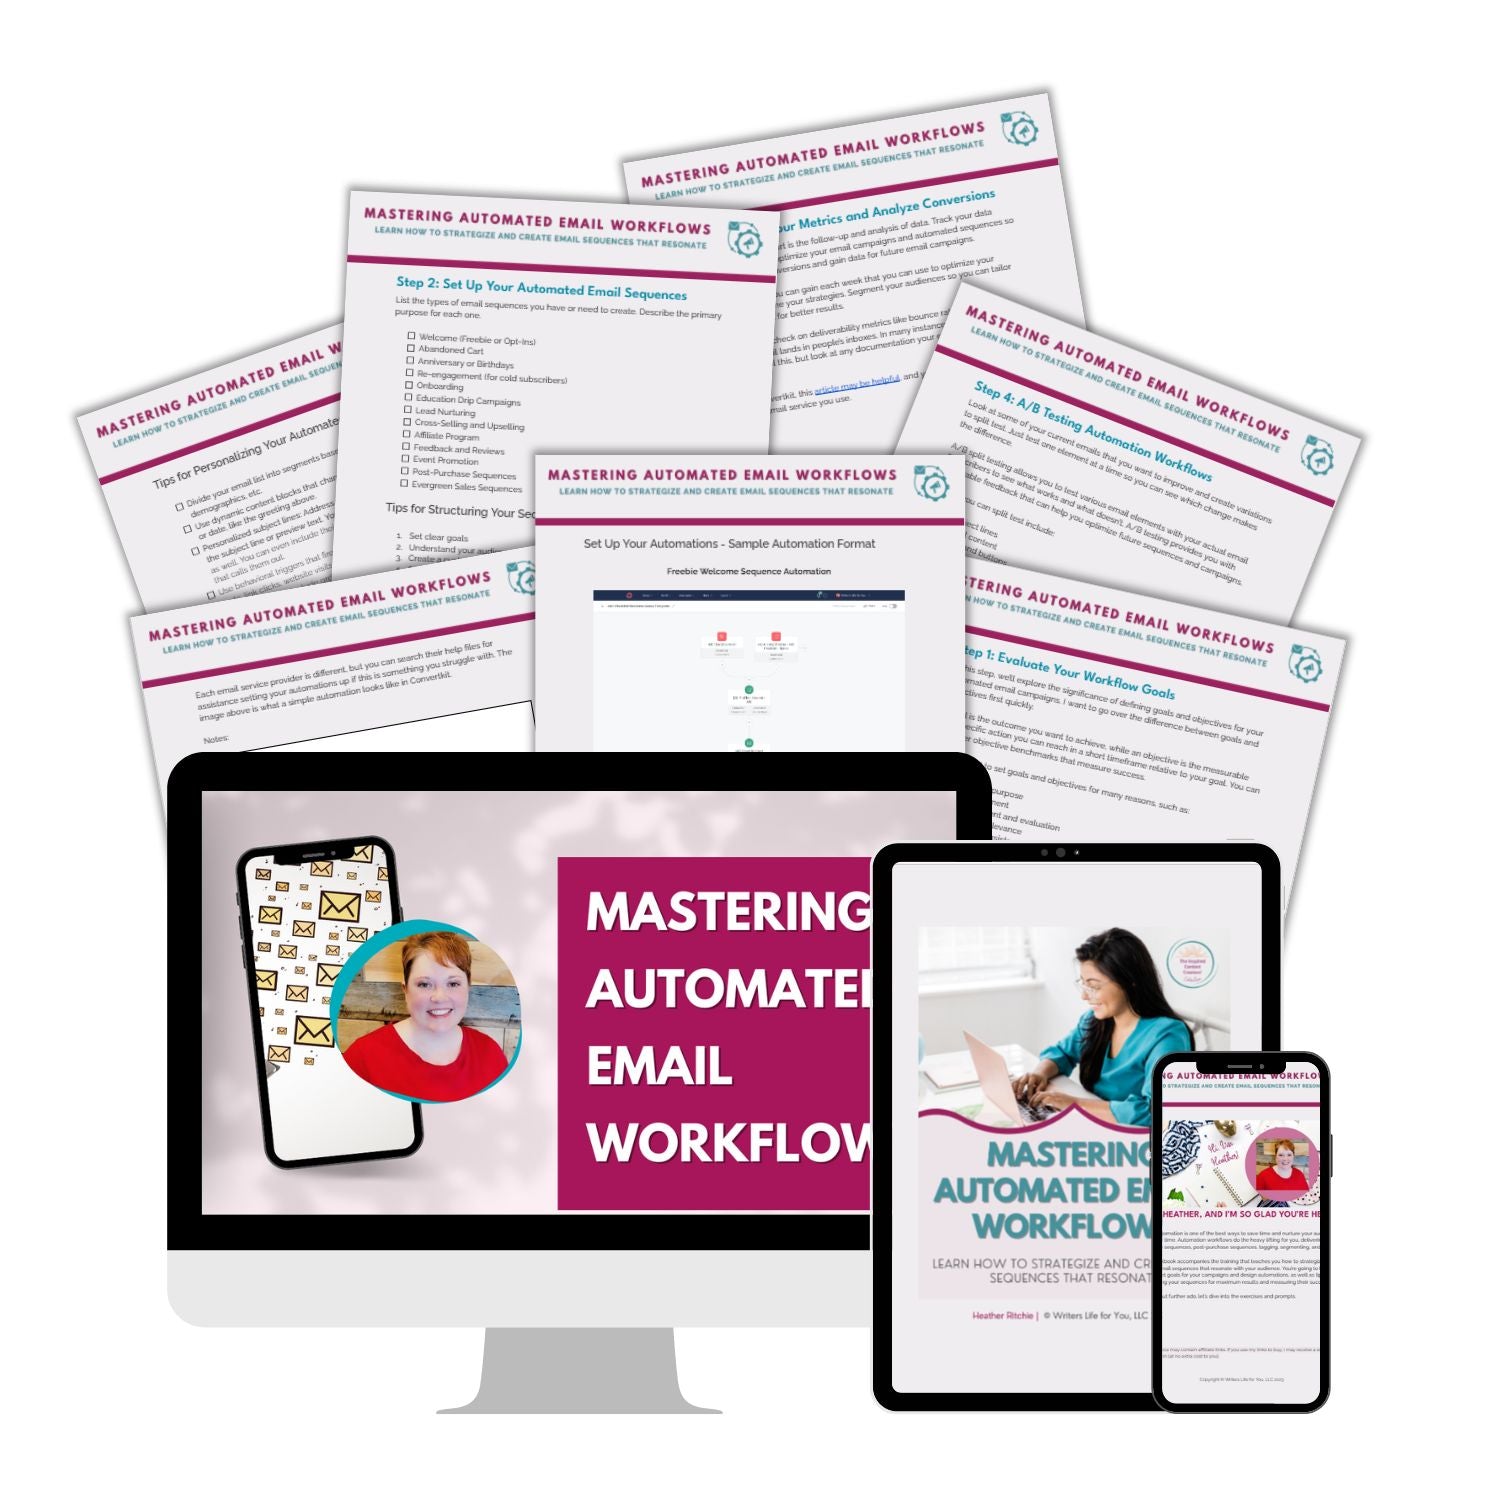 Mastering Automated Email Workflows training and workbook